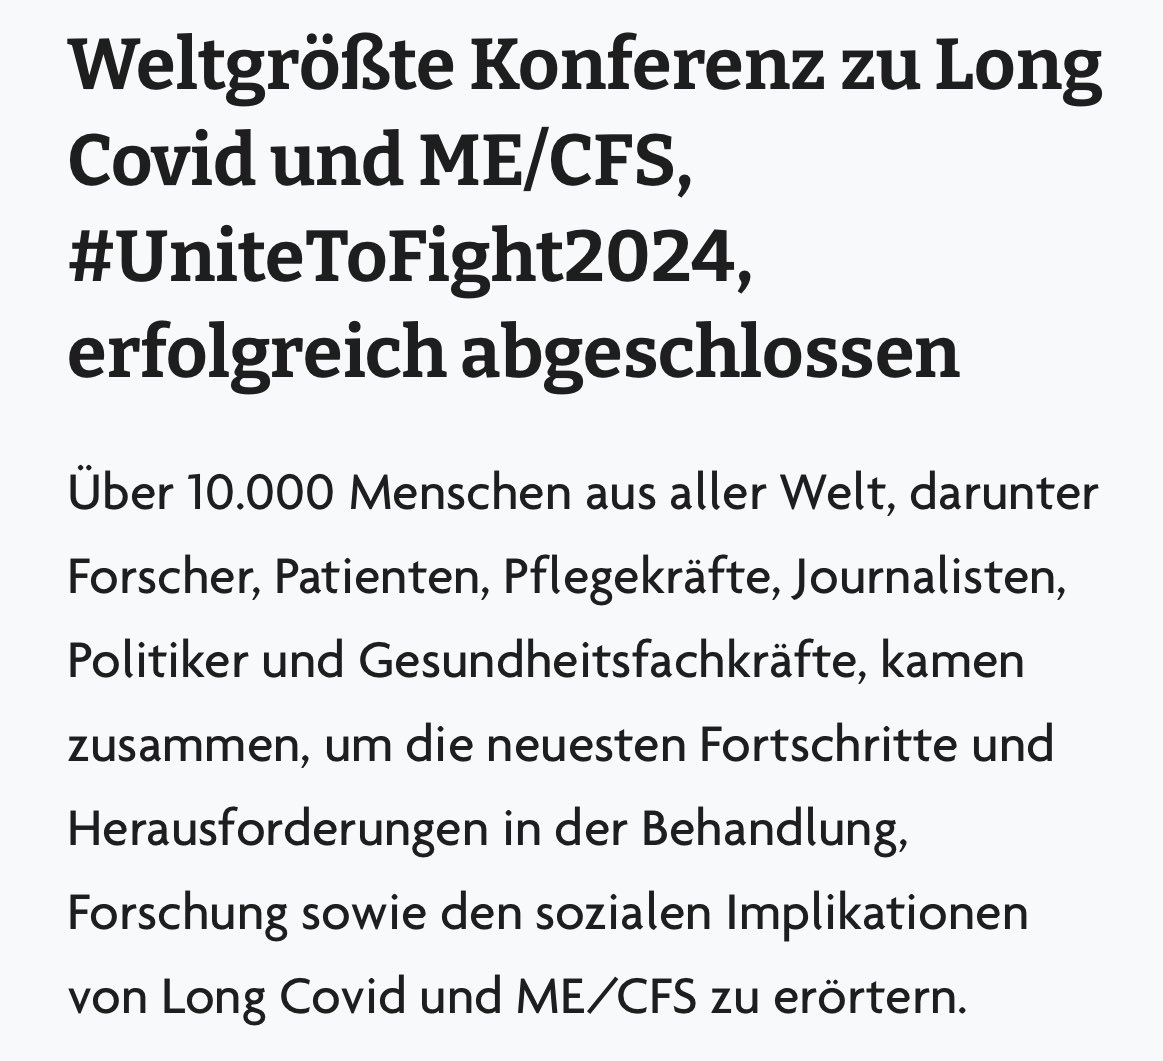 🚨 Our new press release is available and ready to share with your news outlets.

„ World’s Largest Conference on Long Covid and ME/CFS, #UniteToFight2024, Concludes Successfully“

English: unitetofight2024.world/news/final-pre…

German:  unitetofight2024.world/news/abschlies…